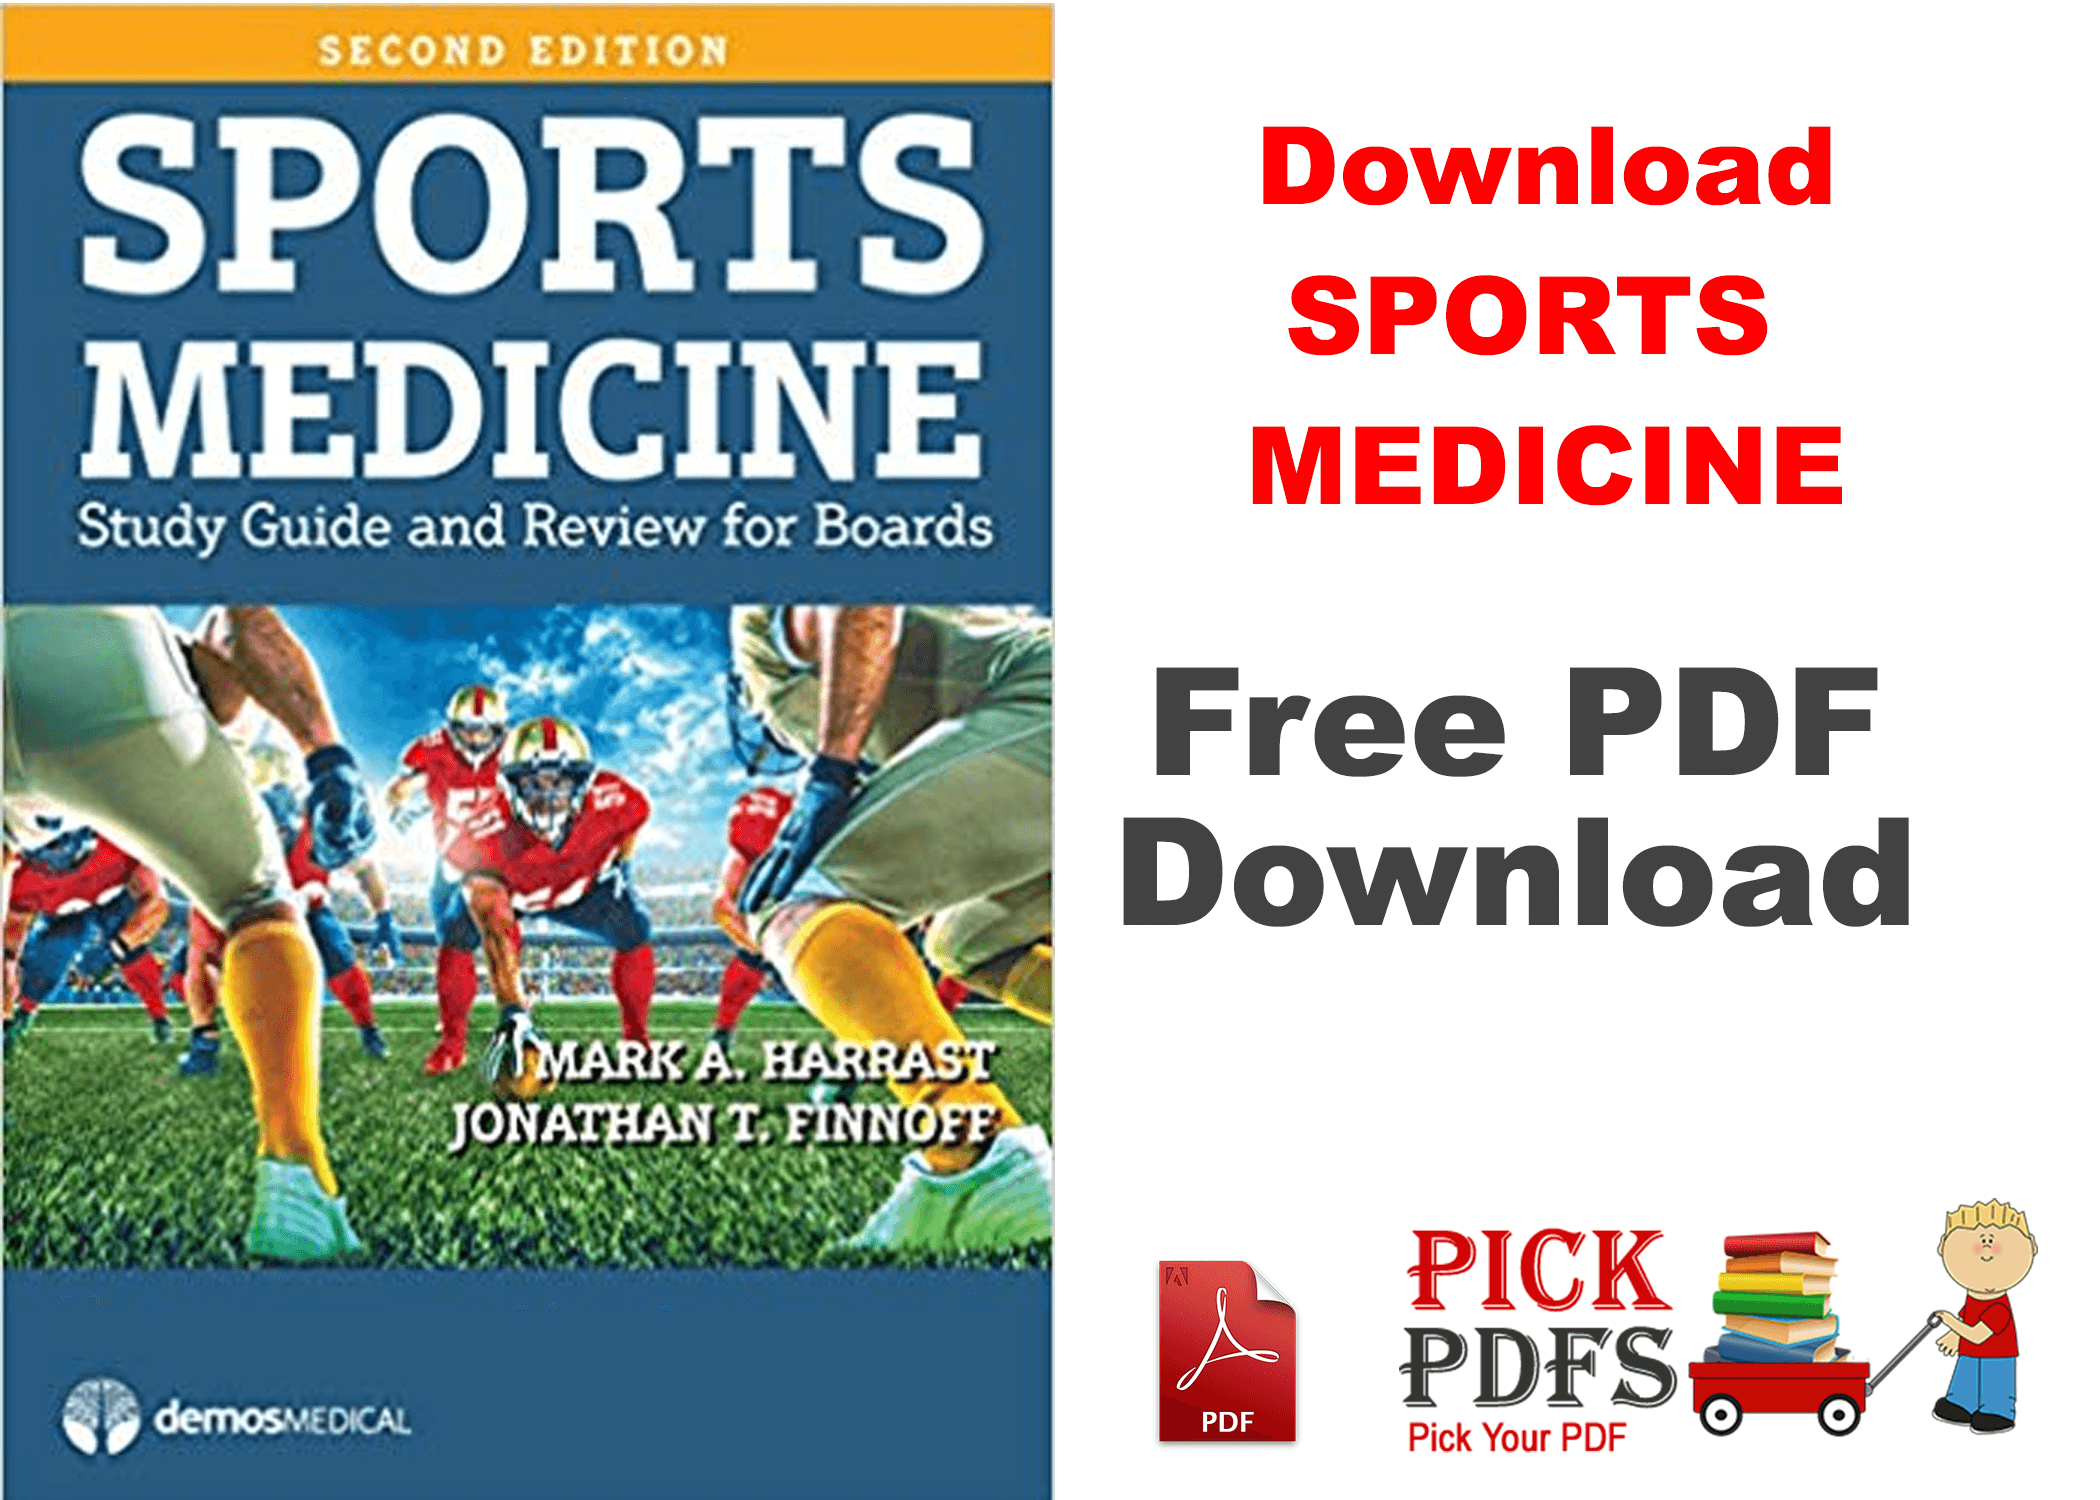 https://pickpdfs.com/sports-medicine-2nd-edition-for-review-and-board-free-pdf-book-download/